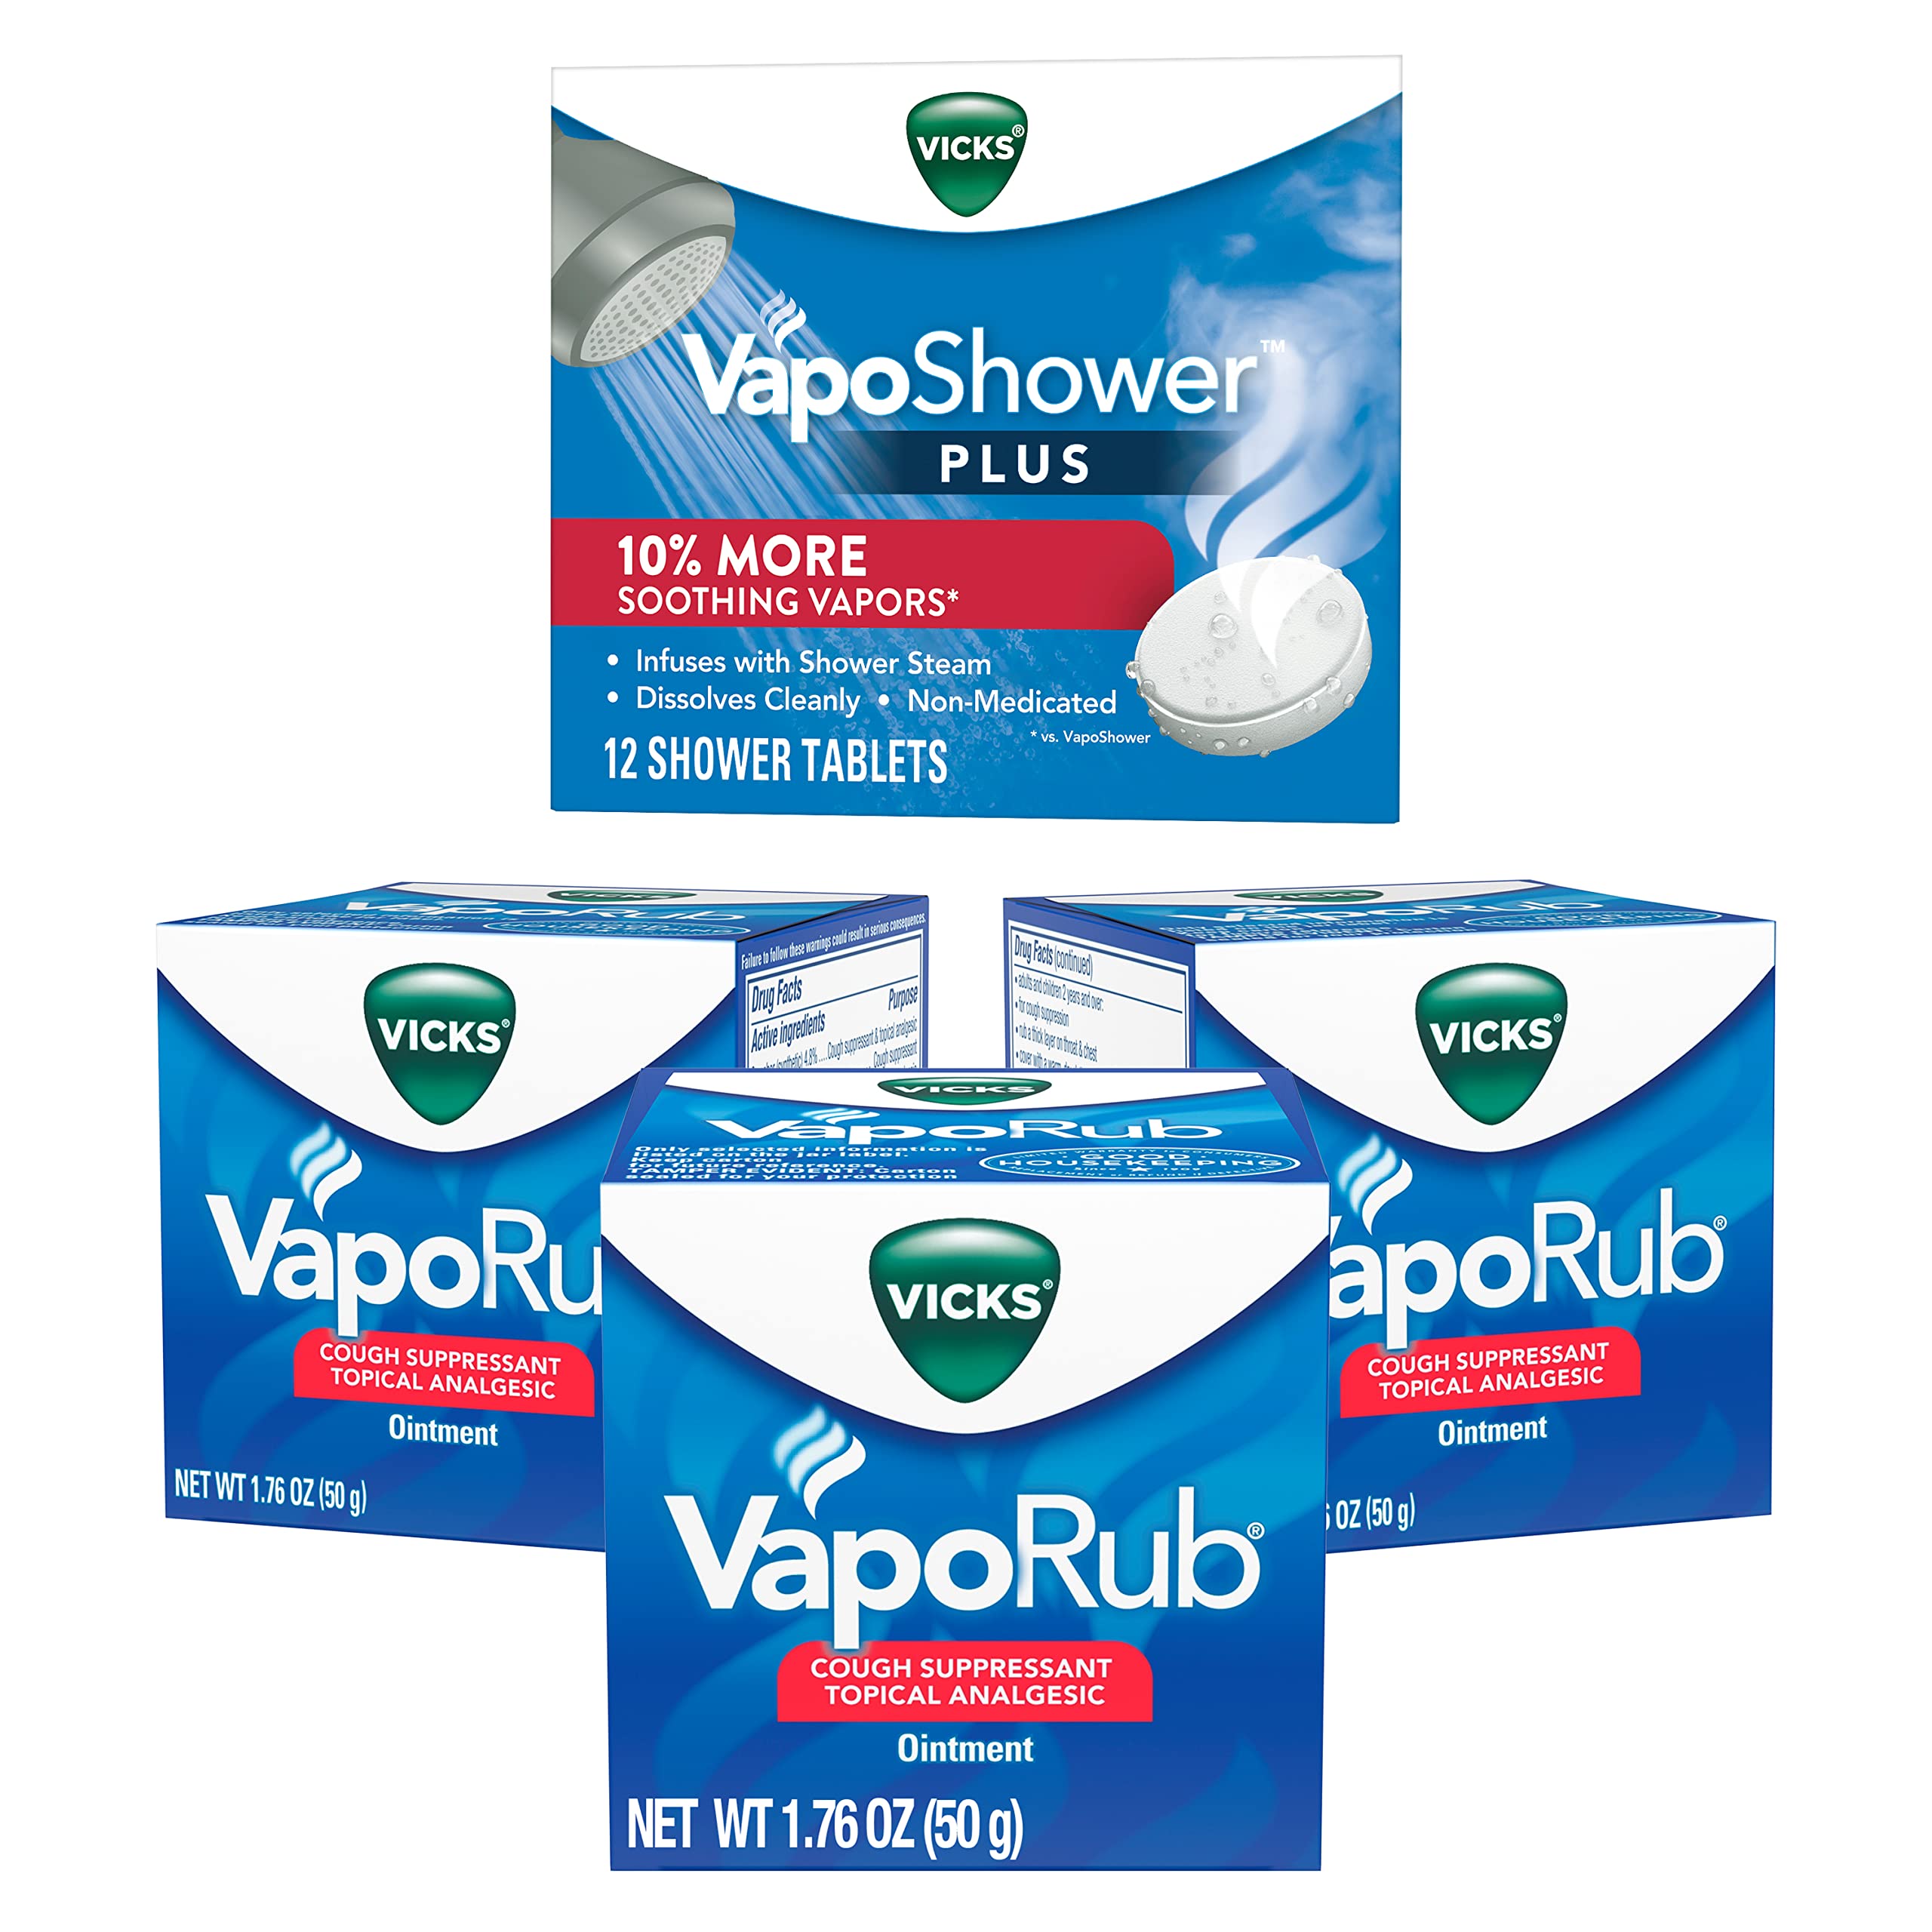 Vicks VapoRub, Chest Rub Ointment, Relief from Cough, Cold w/Original Medicated Vapors, 1.76 OZ (3 Pack) VapoShower Plus, Shower Bomb Tablets, Soothing Non-Medicated Vapors, 12 Tablets